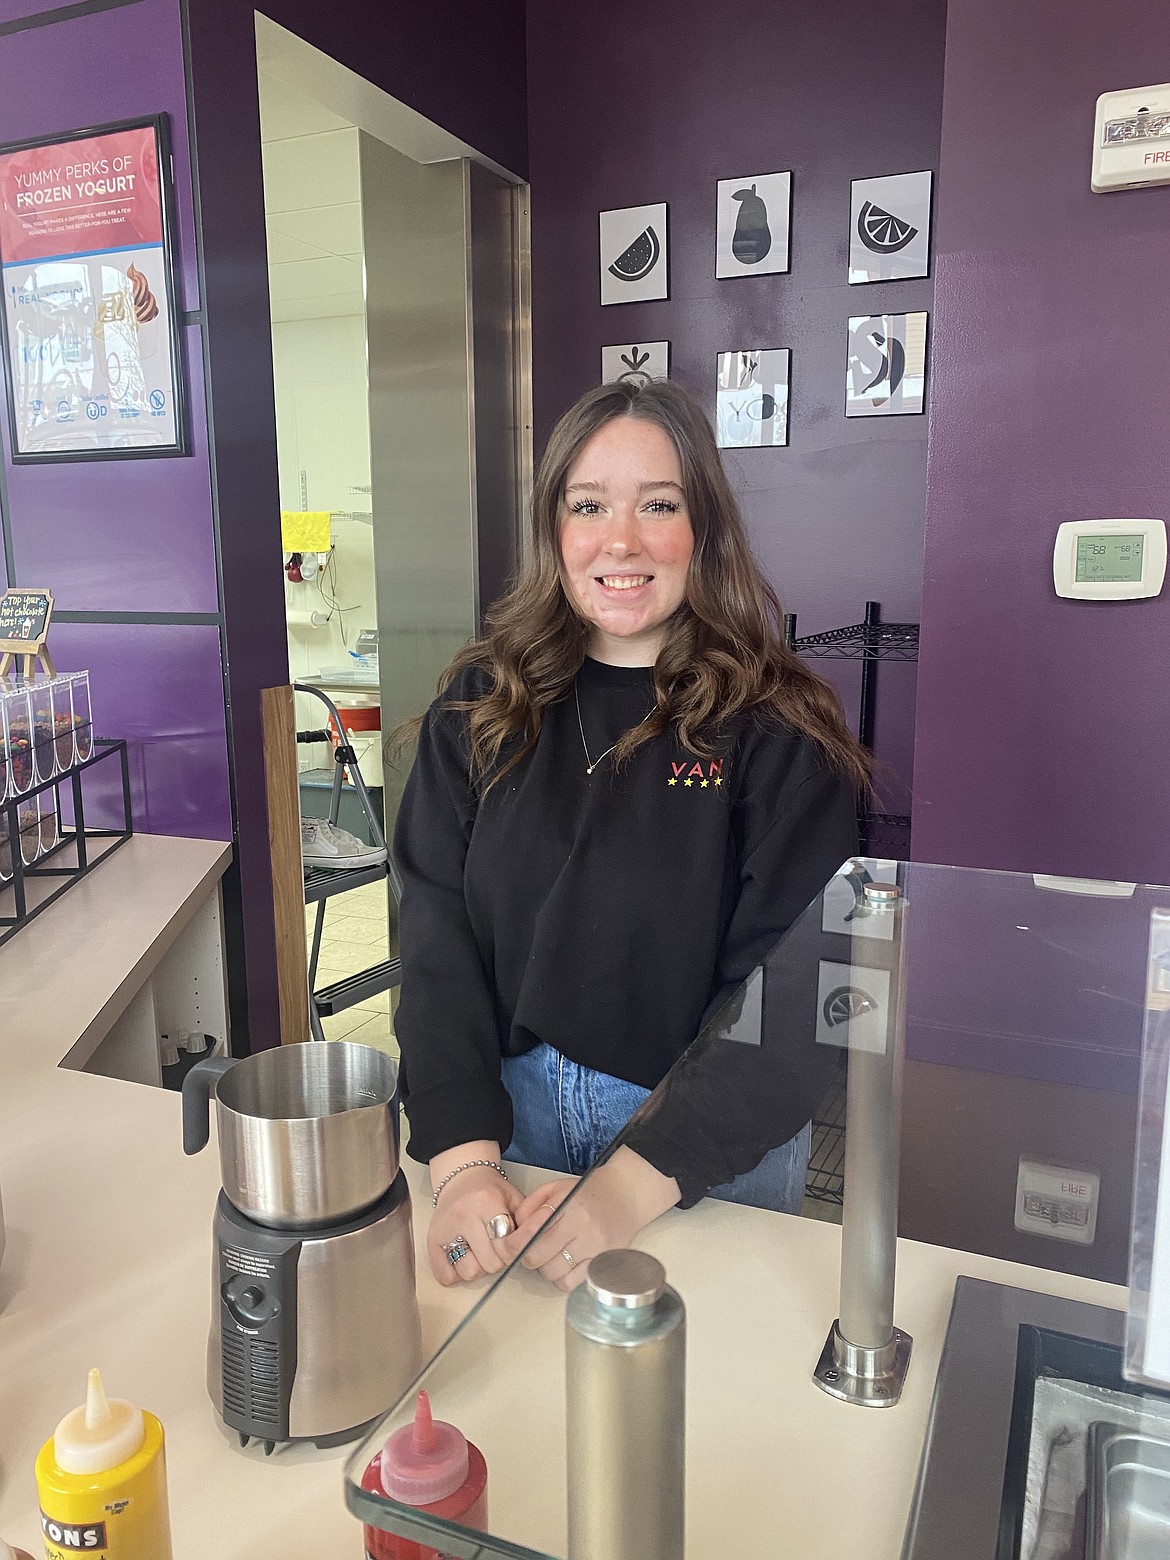 Coeur d'Alene High School senior, Andralinn Jacob, a Grooveberries employee commented on the influx of new students she's noticed at school.